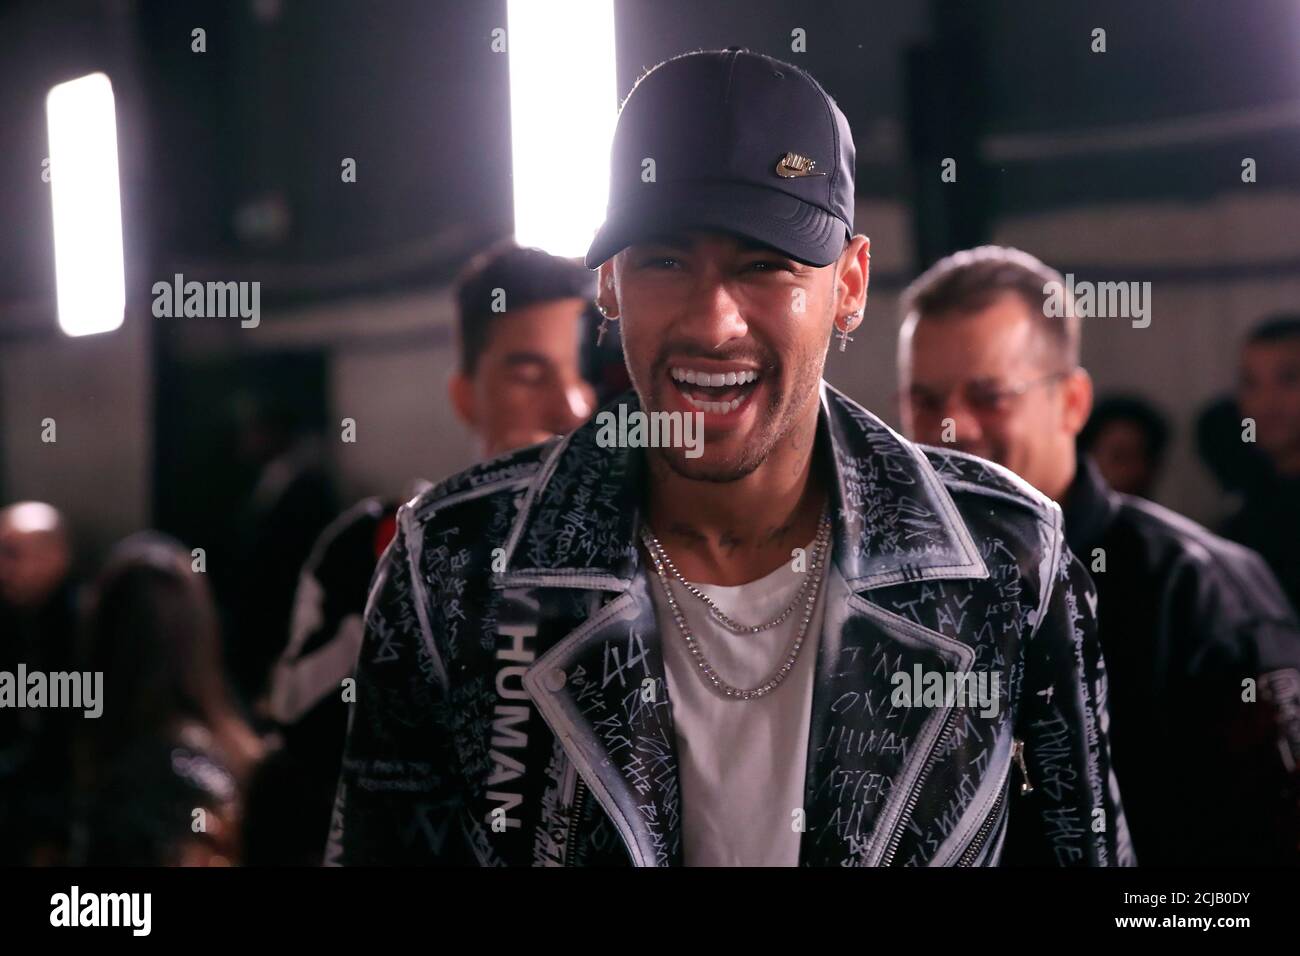 Paris Saint Germain soccer star Neymar attends a fashion show by designer  Olivier Rousteing as part of his Fall/Winter 2019-2020 collection show for  fashion house Balmain during Men's Fashion Week in Paris,